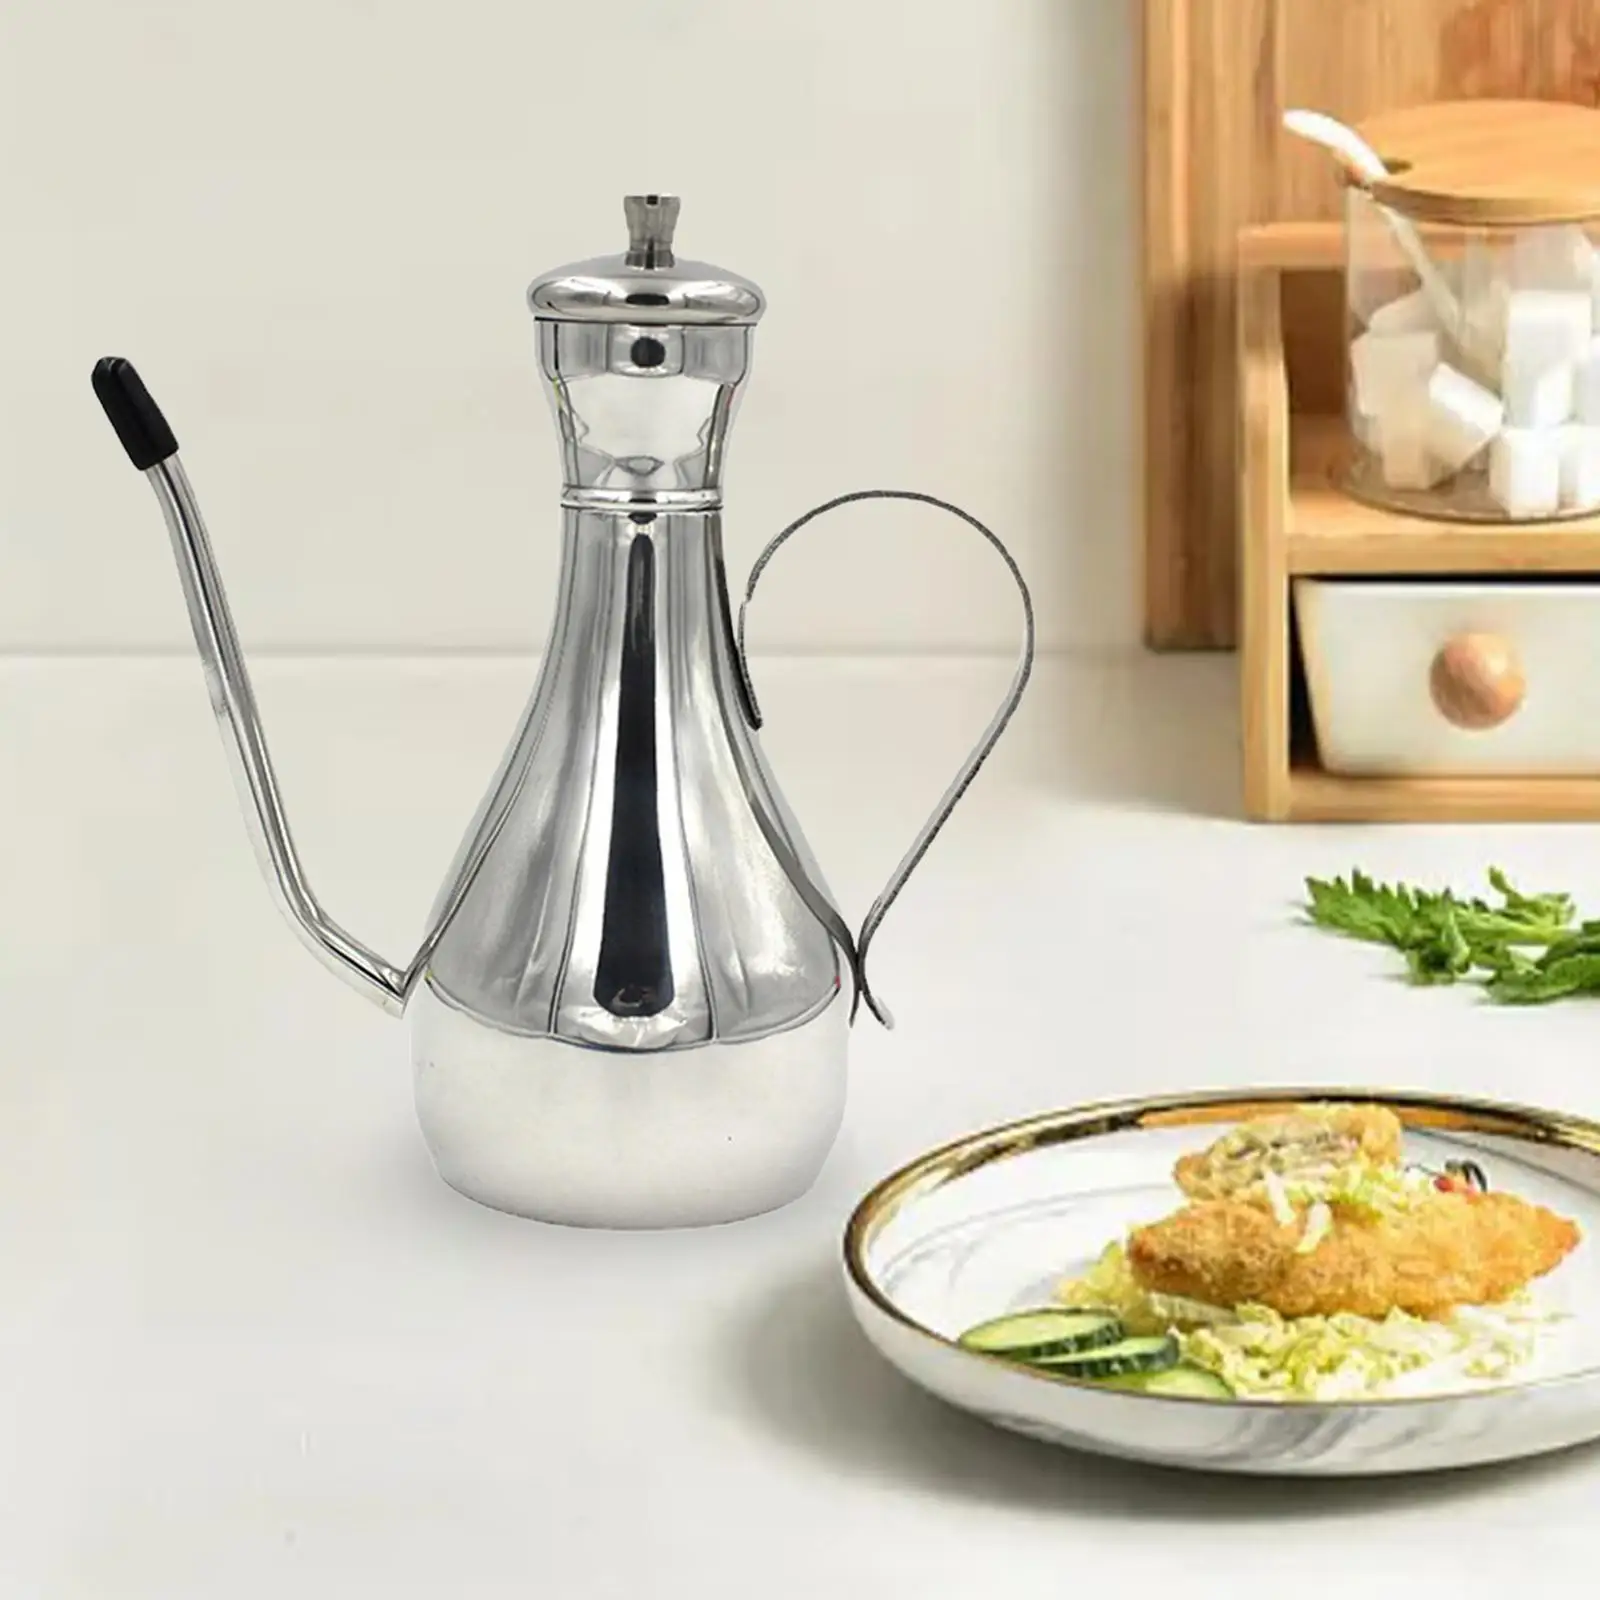 Stainless Steel Oil Dispenser Kettle Eay to Clean Silicone Spout Cover Oil Sprayer Leakproof Oil Vinegar Cruet for Camping Home